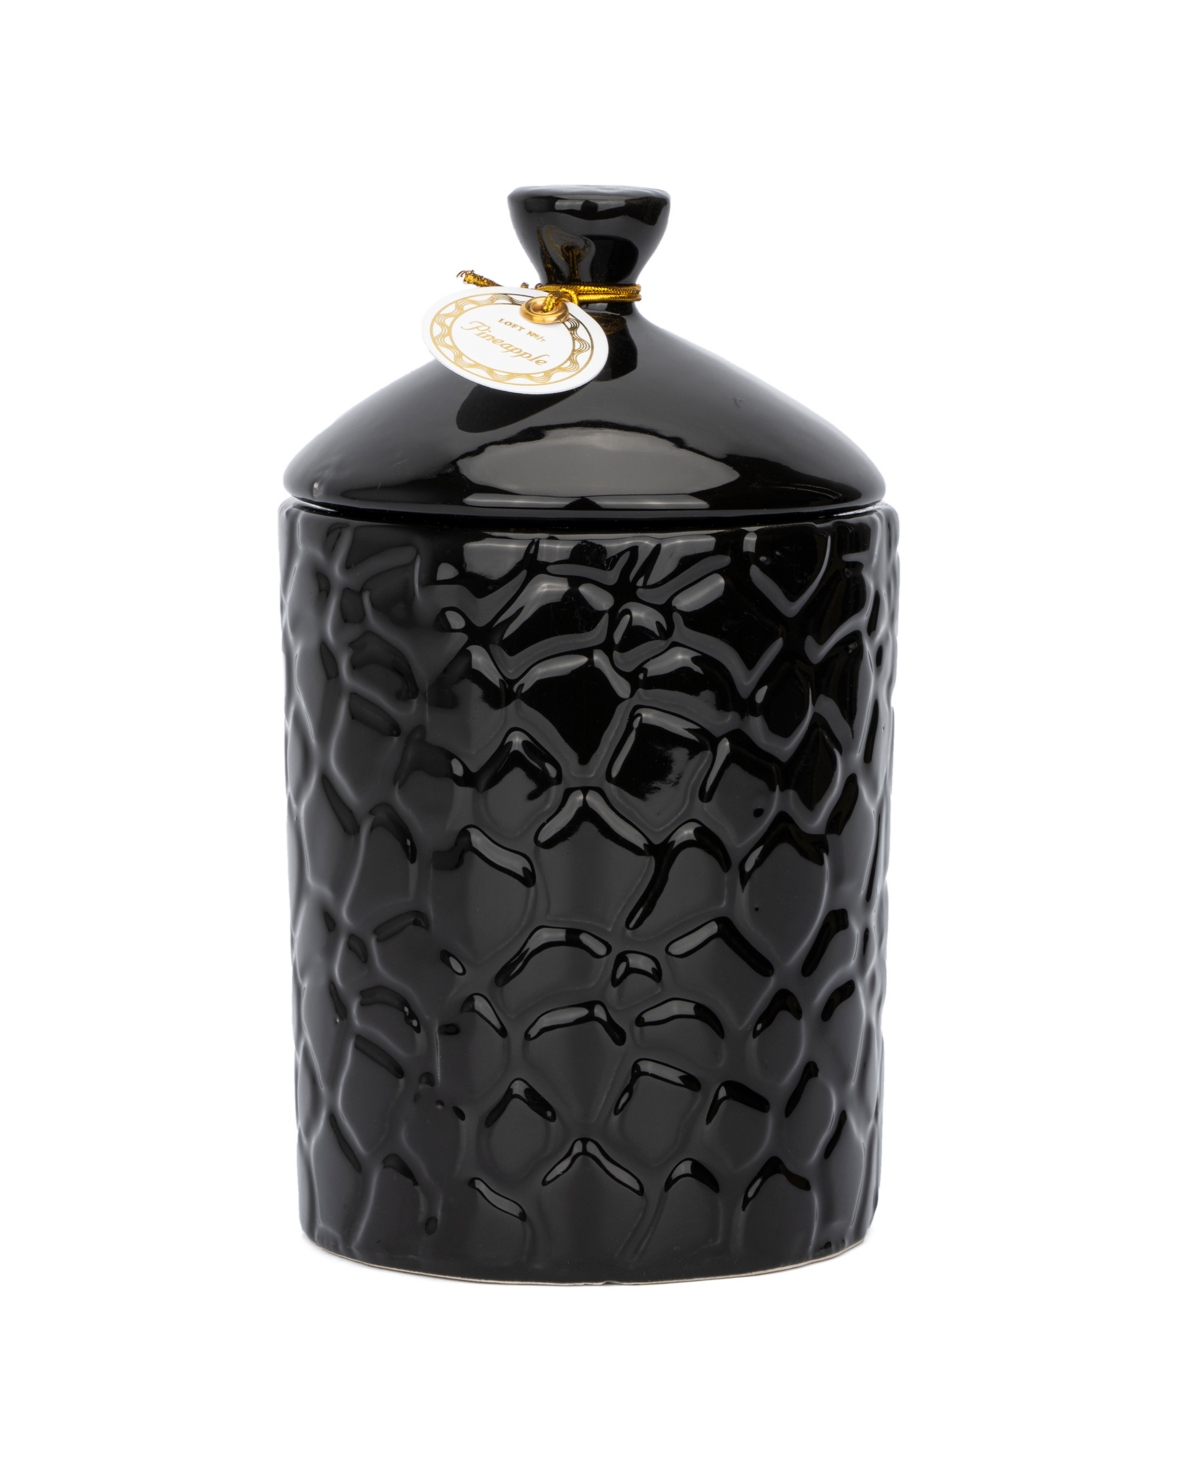 Hybrid & Company Pineapple Scented Jar Candle In Black